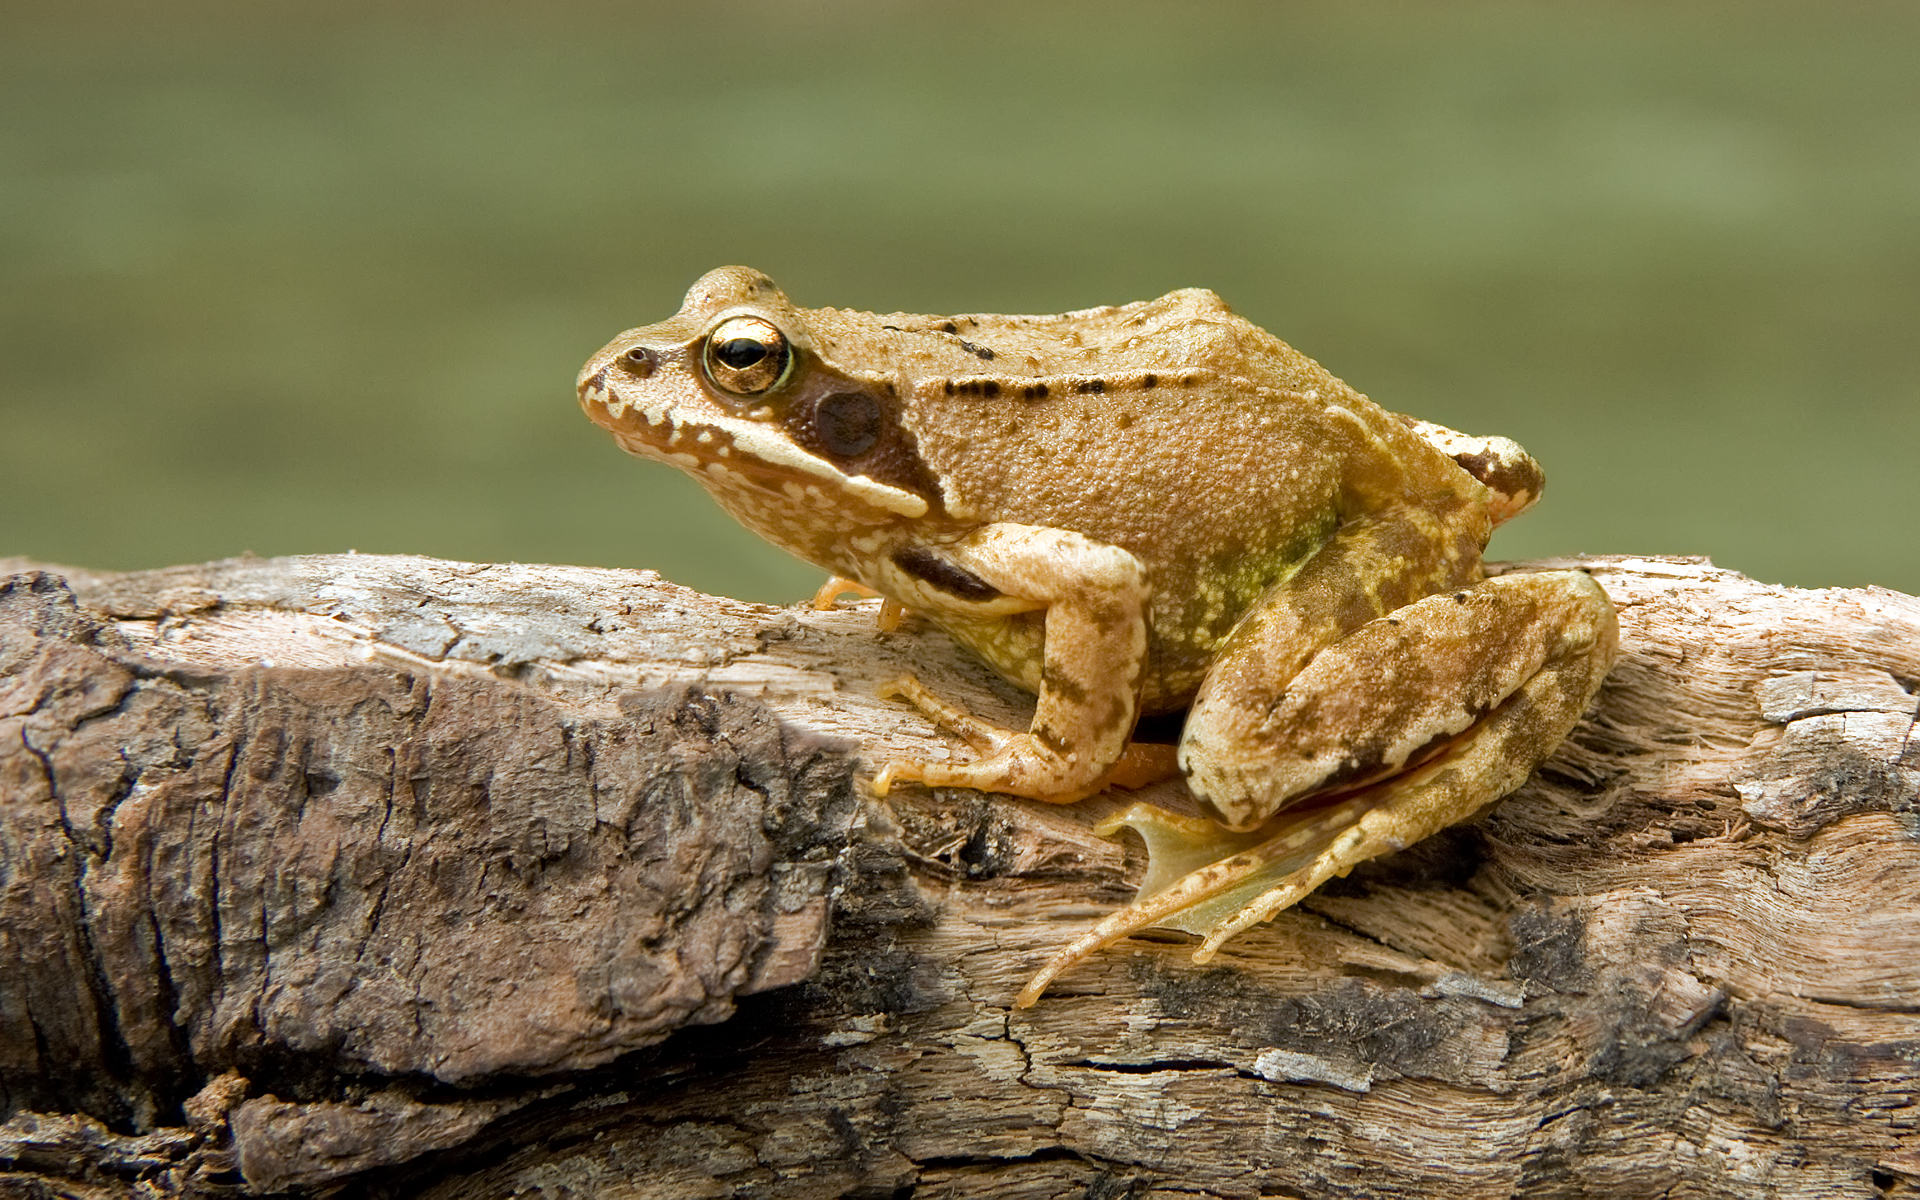 What is the real name of a frog?